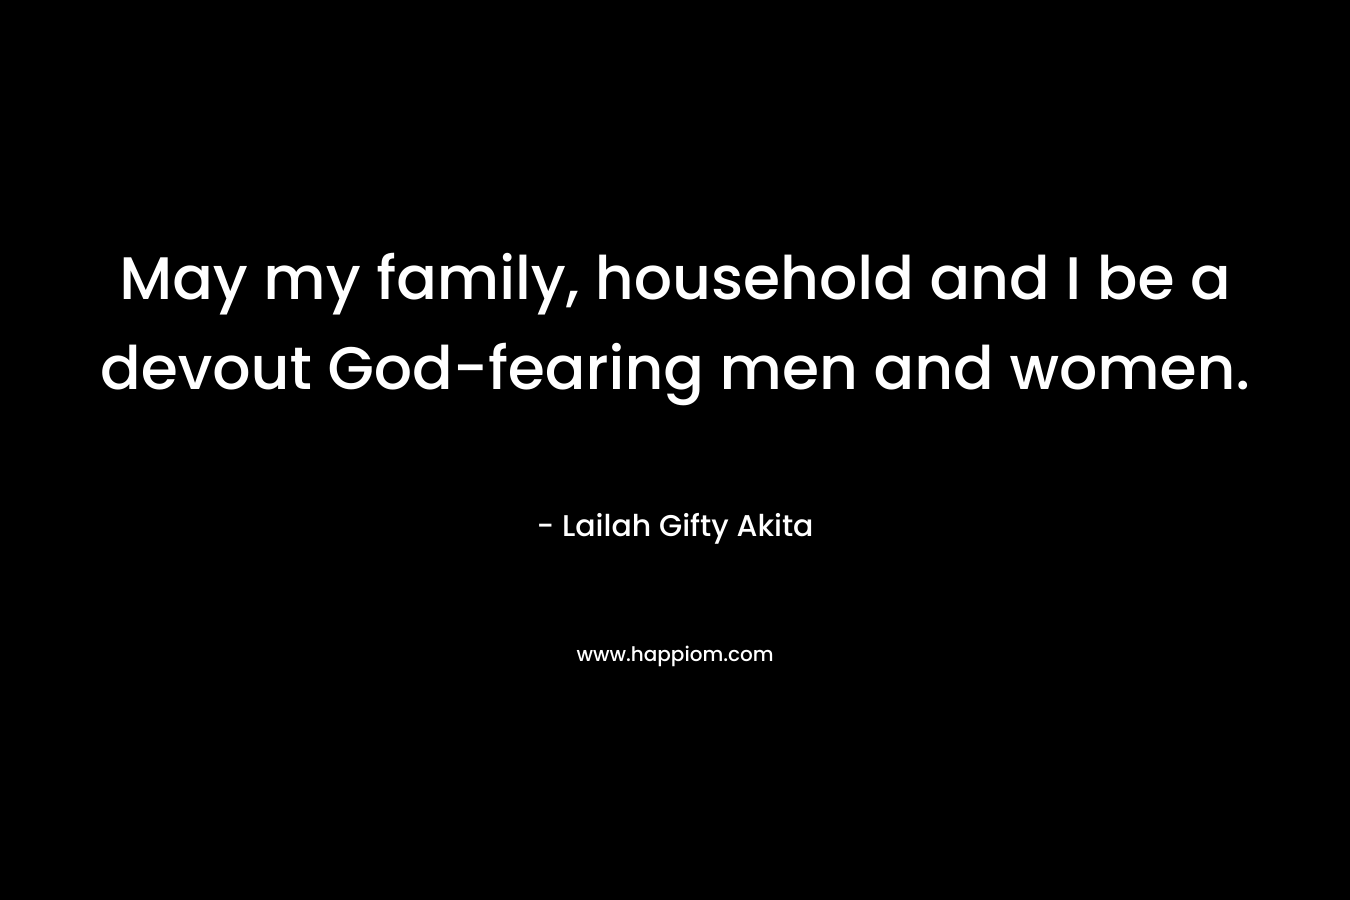 May my family, household and I be a devout God-fearing men and women. – Lailah Gifty Akita